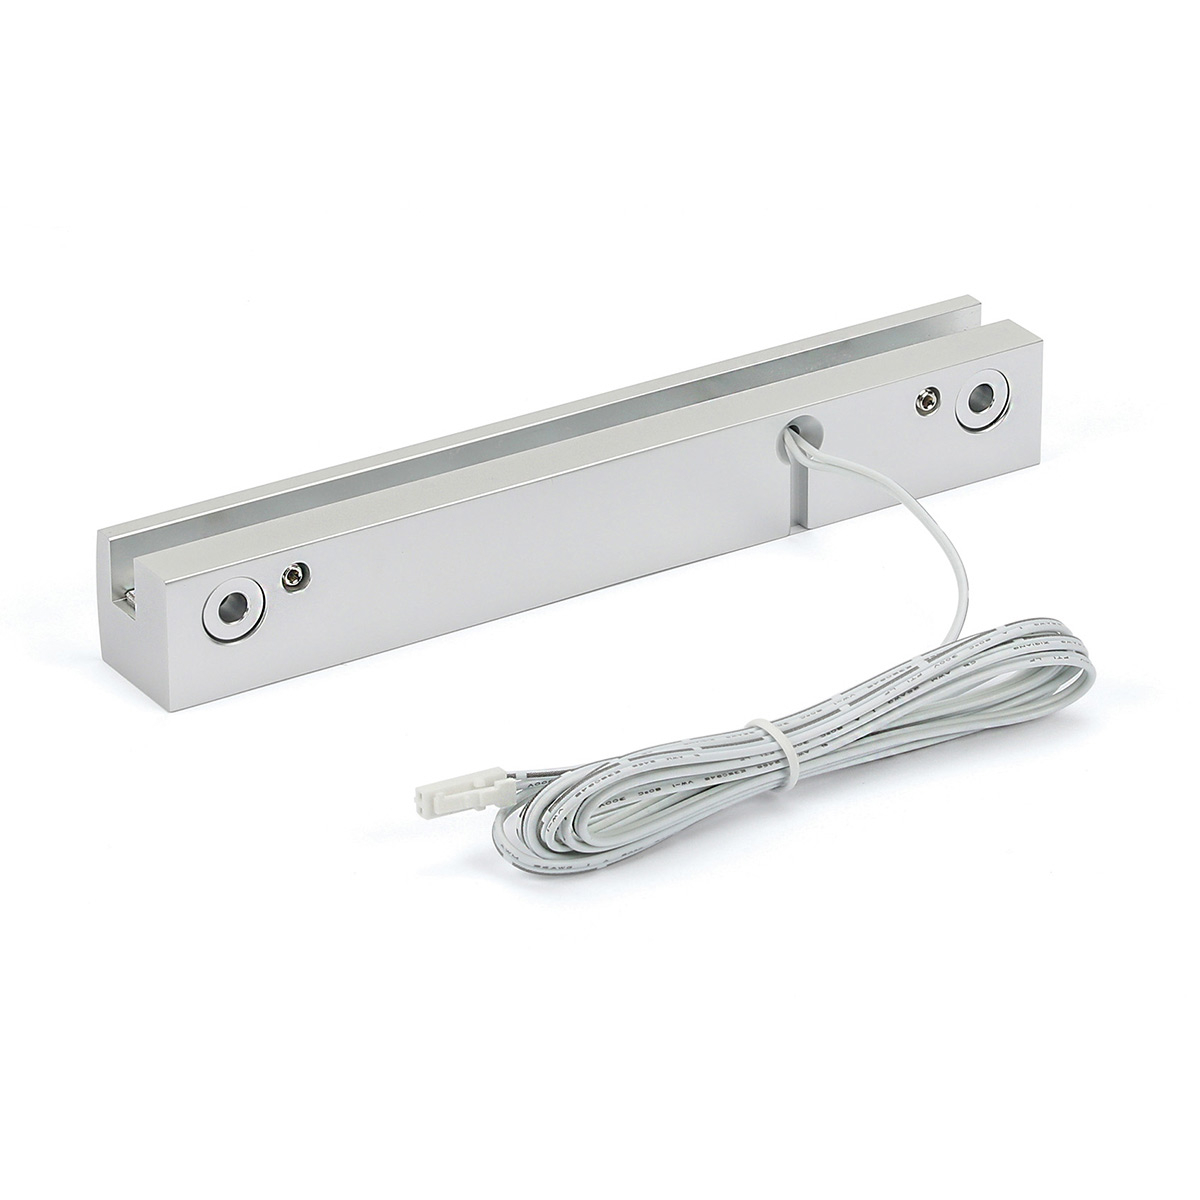 BLUE LED Sign Clamp in 4 3/4'' (120 mm) length X 1'' (25.4 mm) Silver satin aluminum finish.Mount Kit Supports Signs Up To 5/16'' Thick, Wall Mount, Low Voltage transformer included.